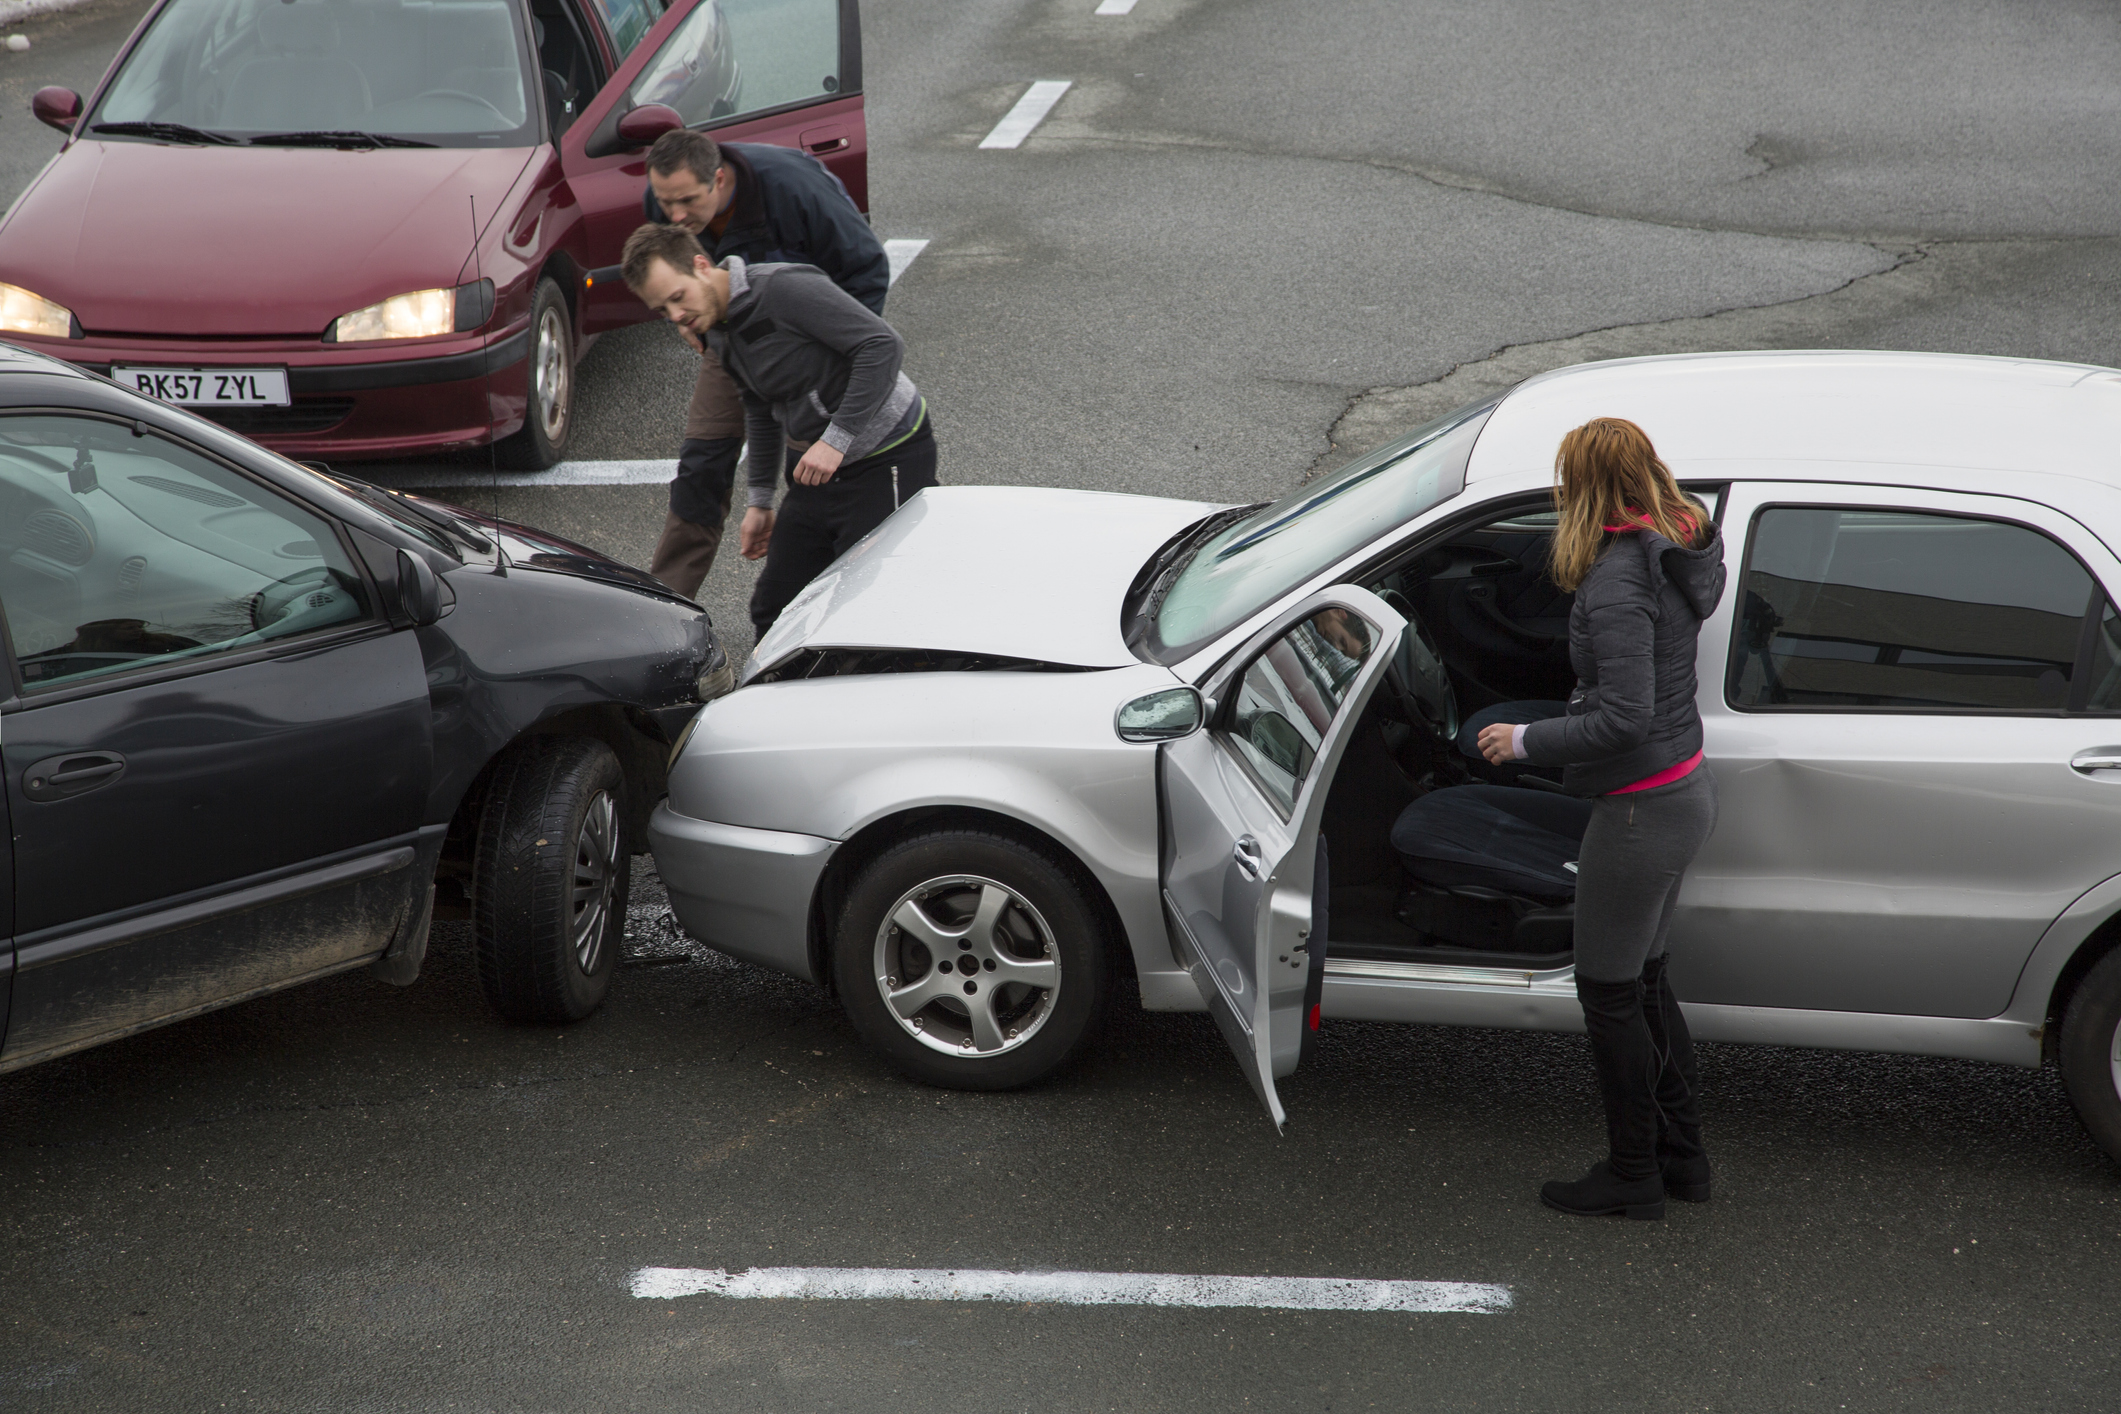 Sherman Law Firm discusses who is at fault in multi-car accidents.